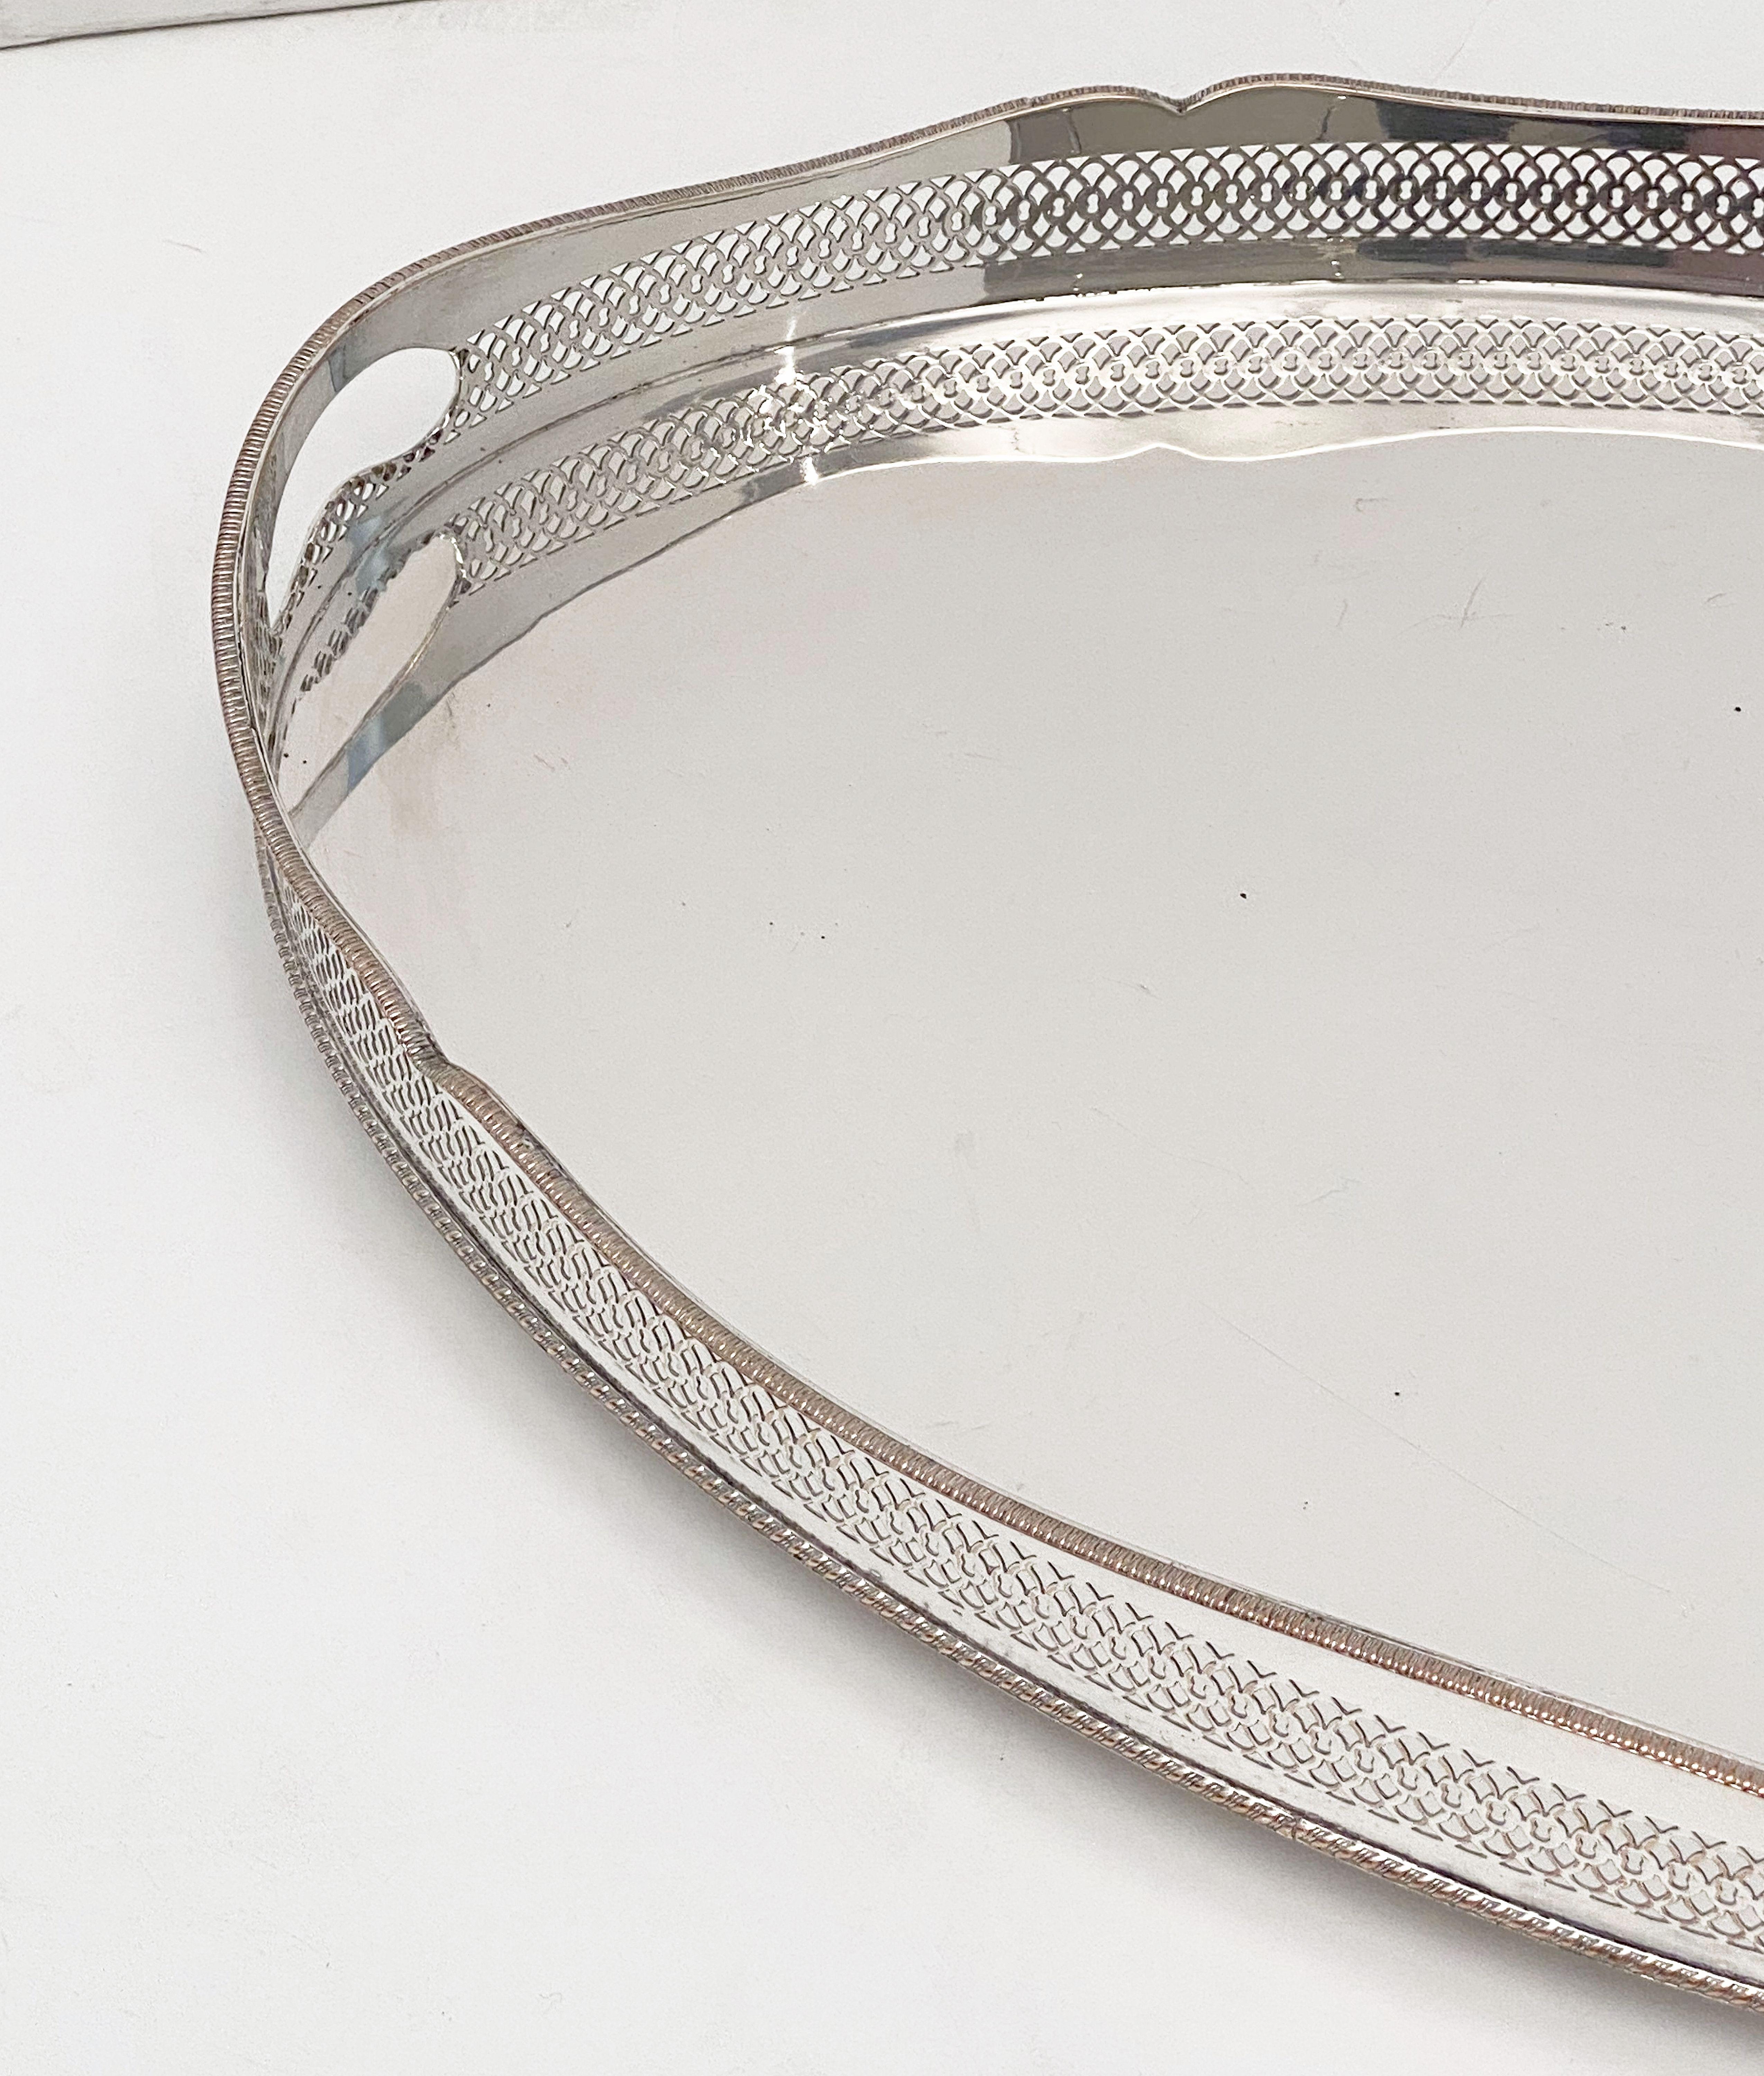 Large English Silver Oval Gallery Serving or Drinks Tray 4